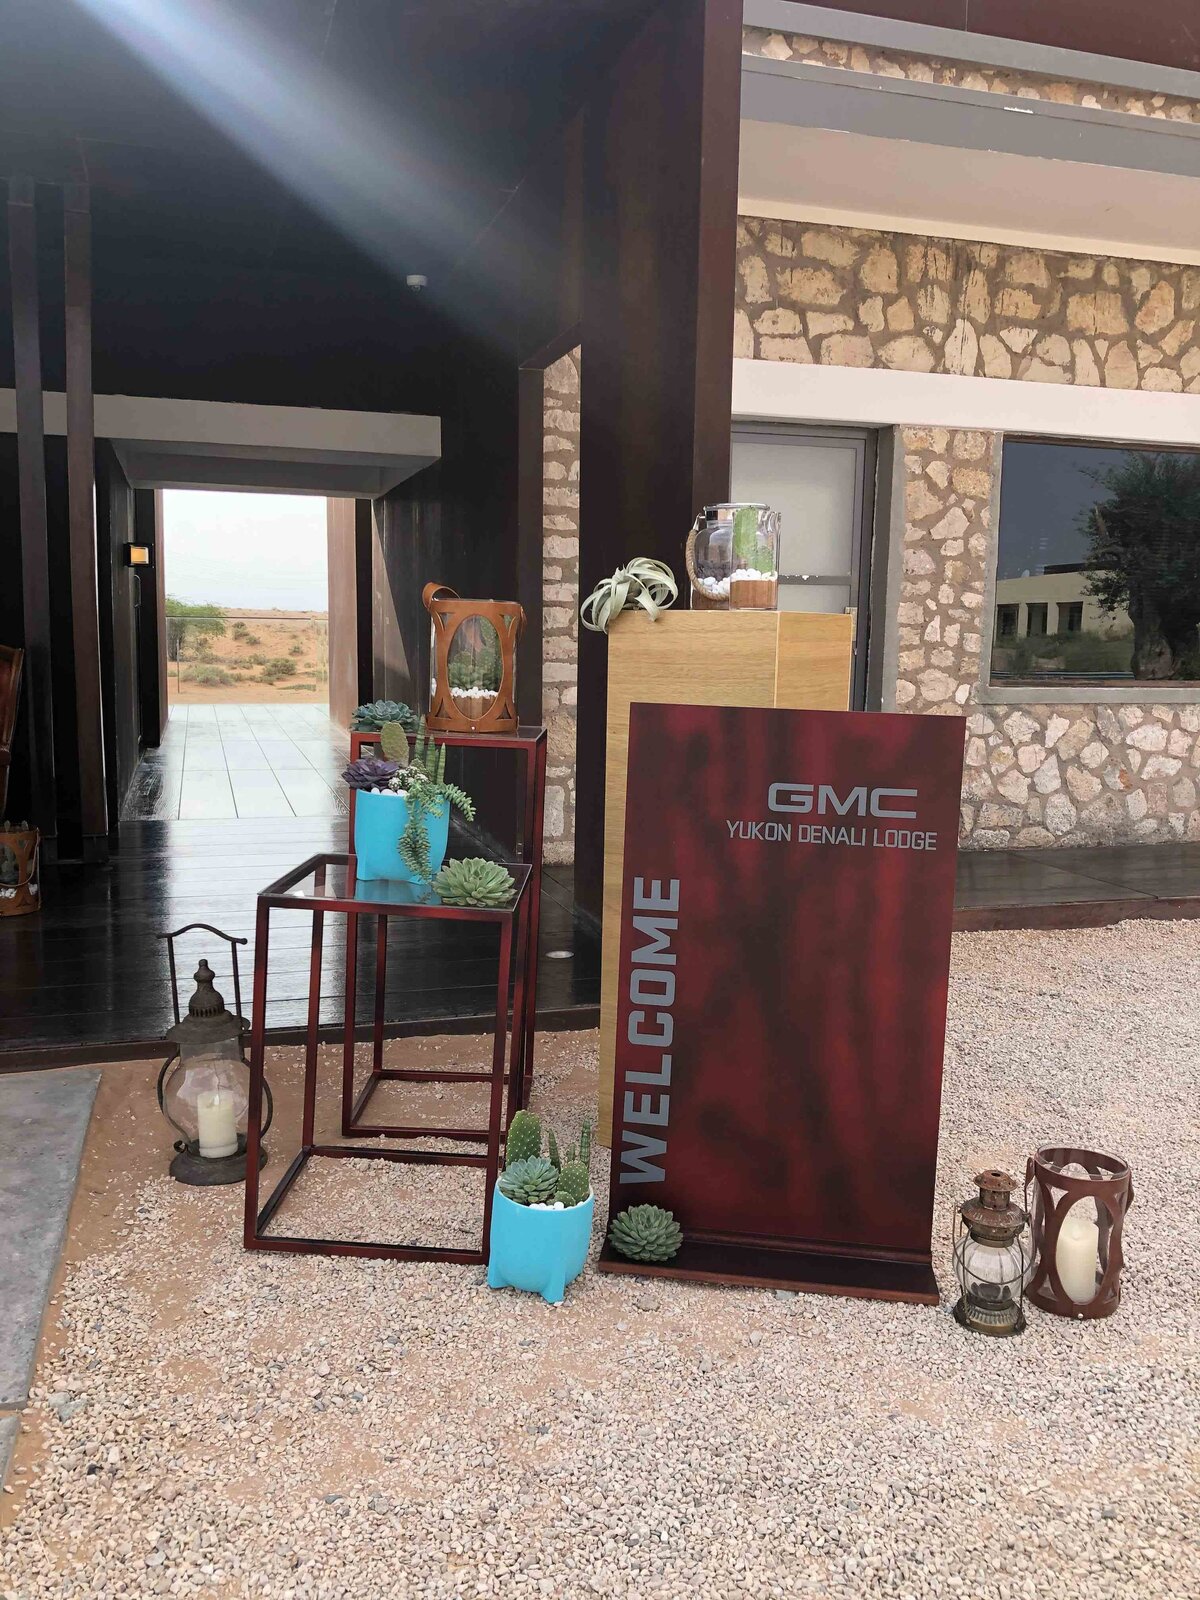 rock-your-event-corporate-event-design-planning-styling-dubai-UAE-GMC-luxurious-luncheon-desert-experience